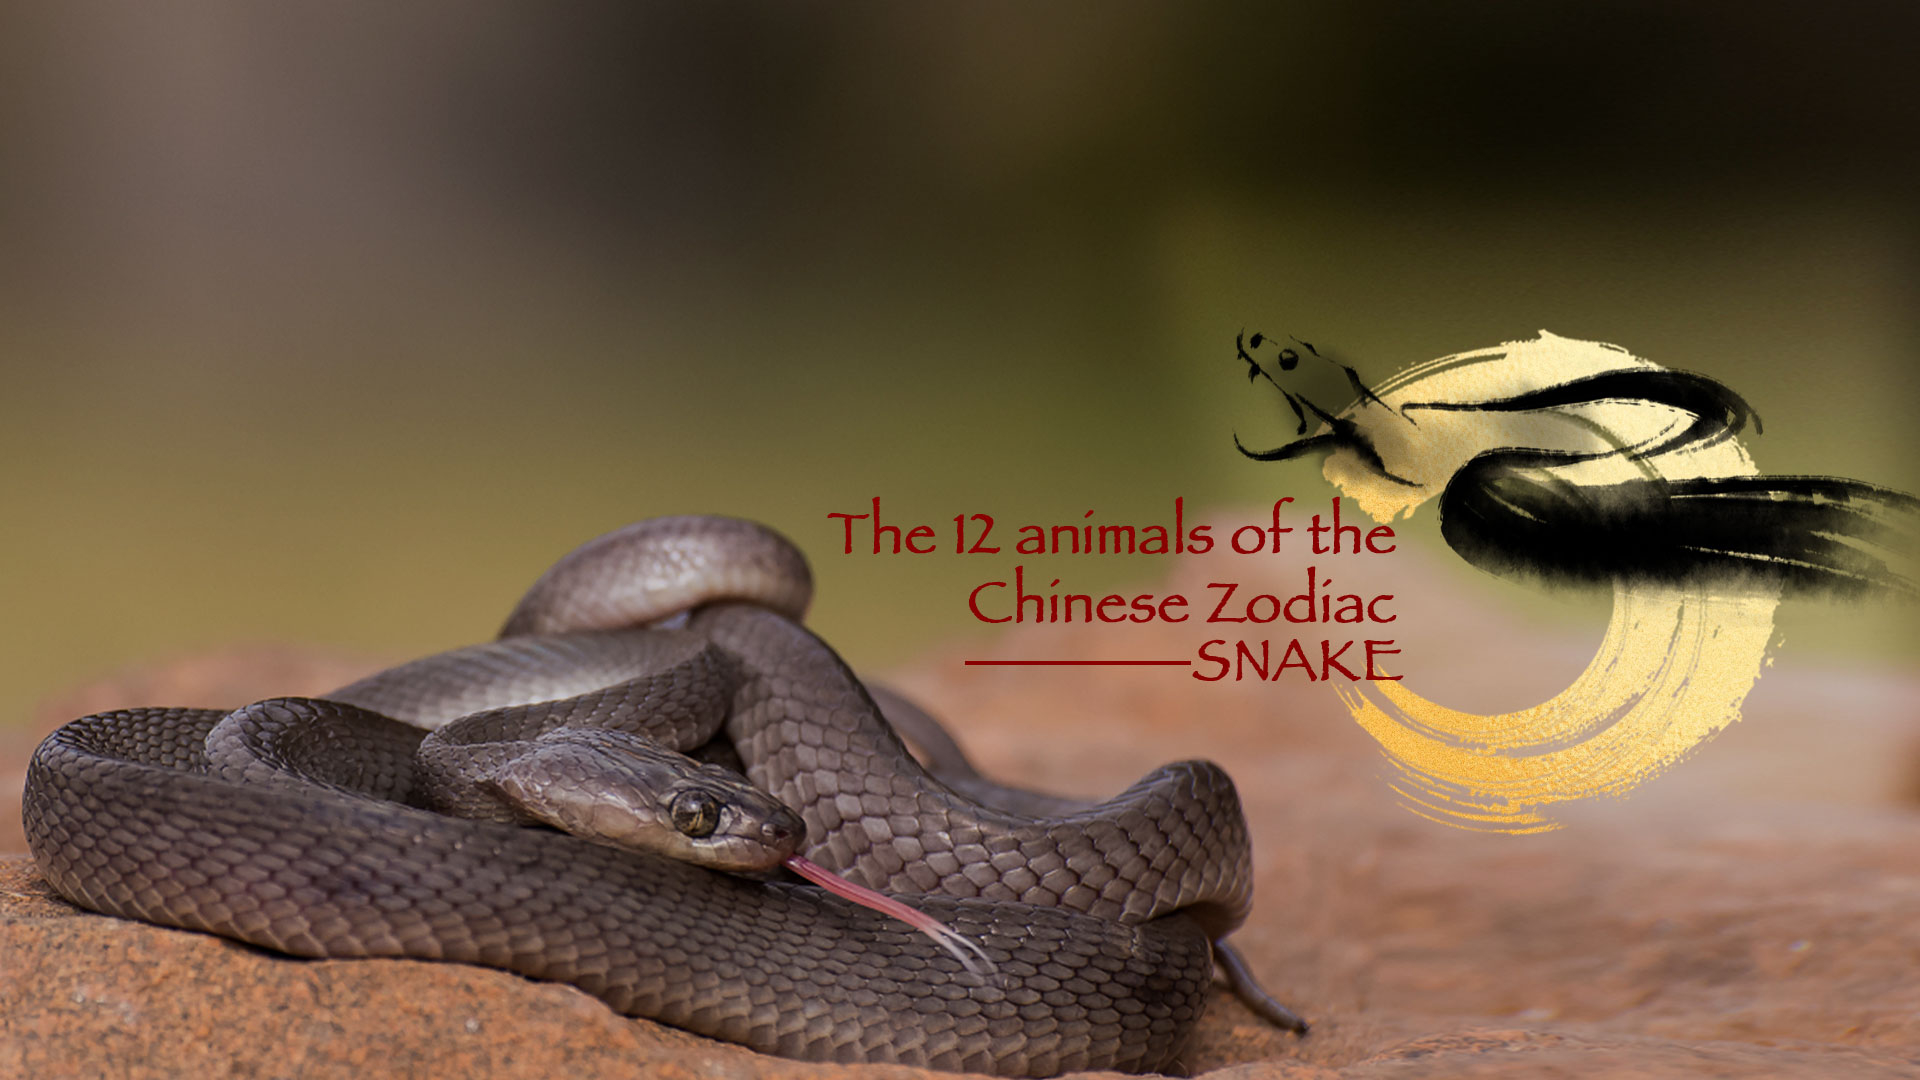 the-12-animals-of-the-chinese-zodiac-snake-cgtn